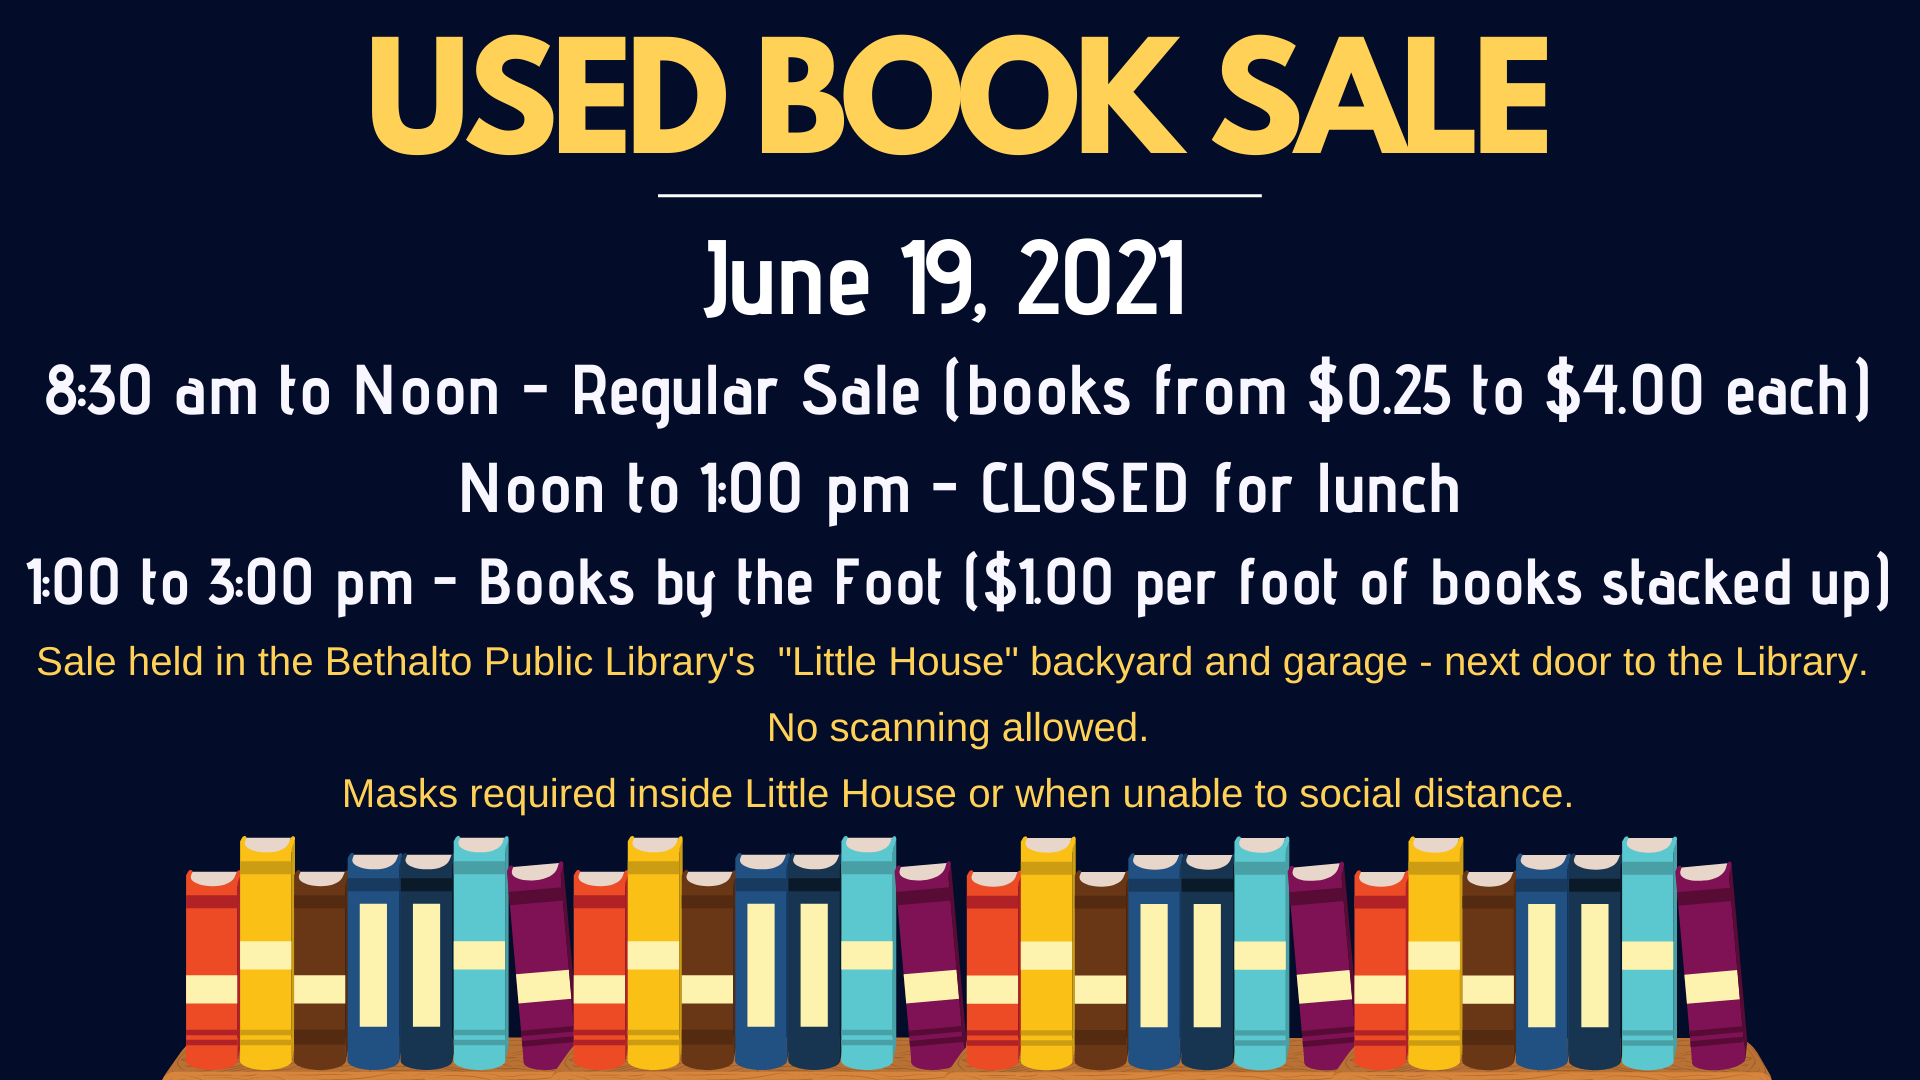 Copy of Used Book Sale for Website (2).png